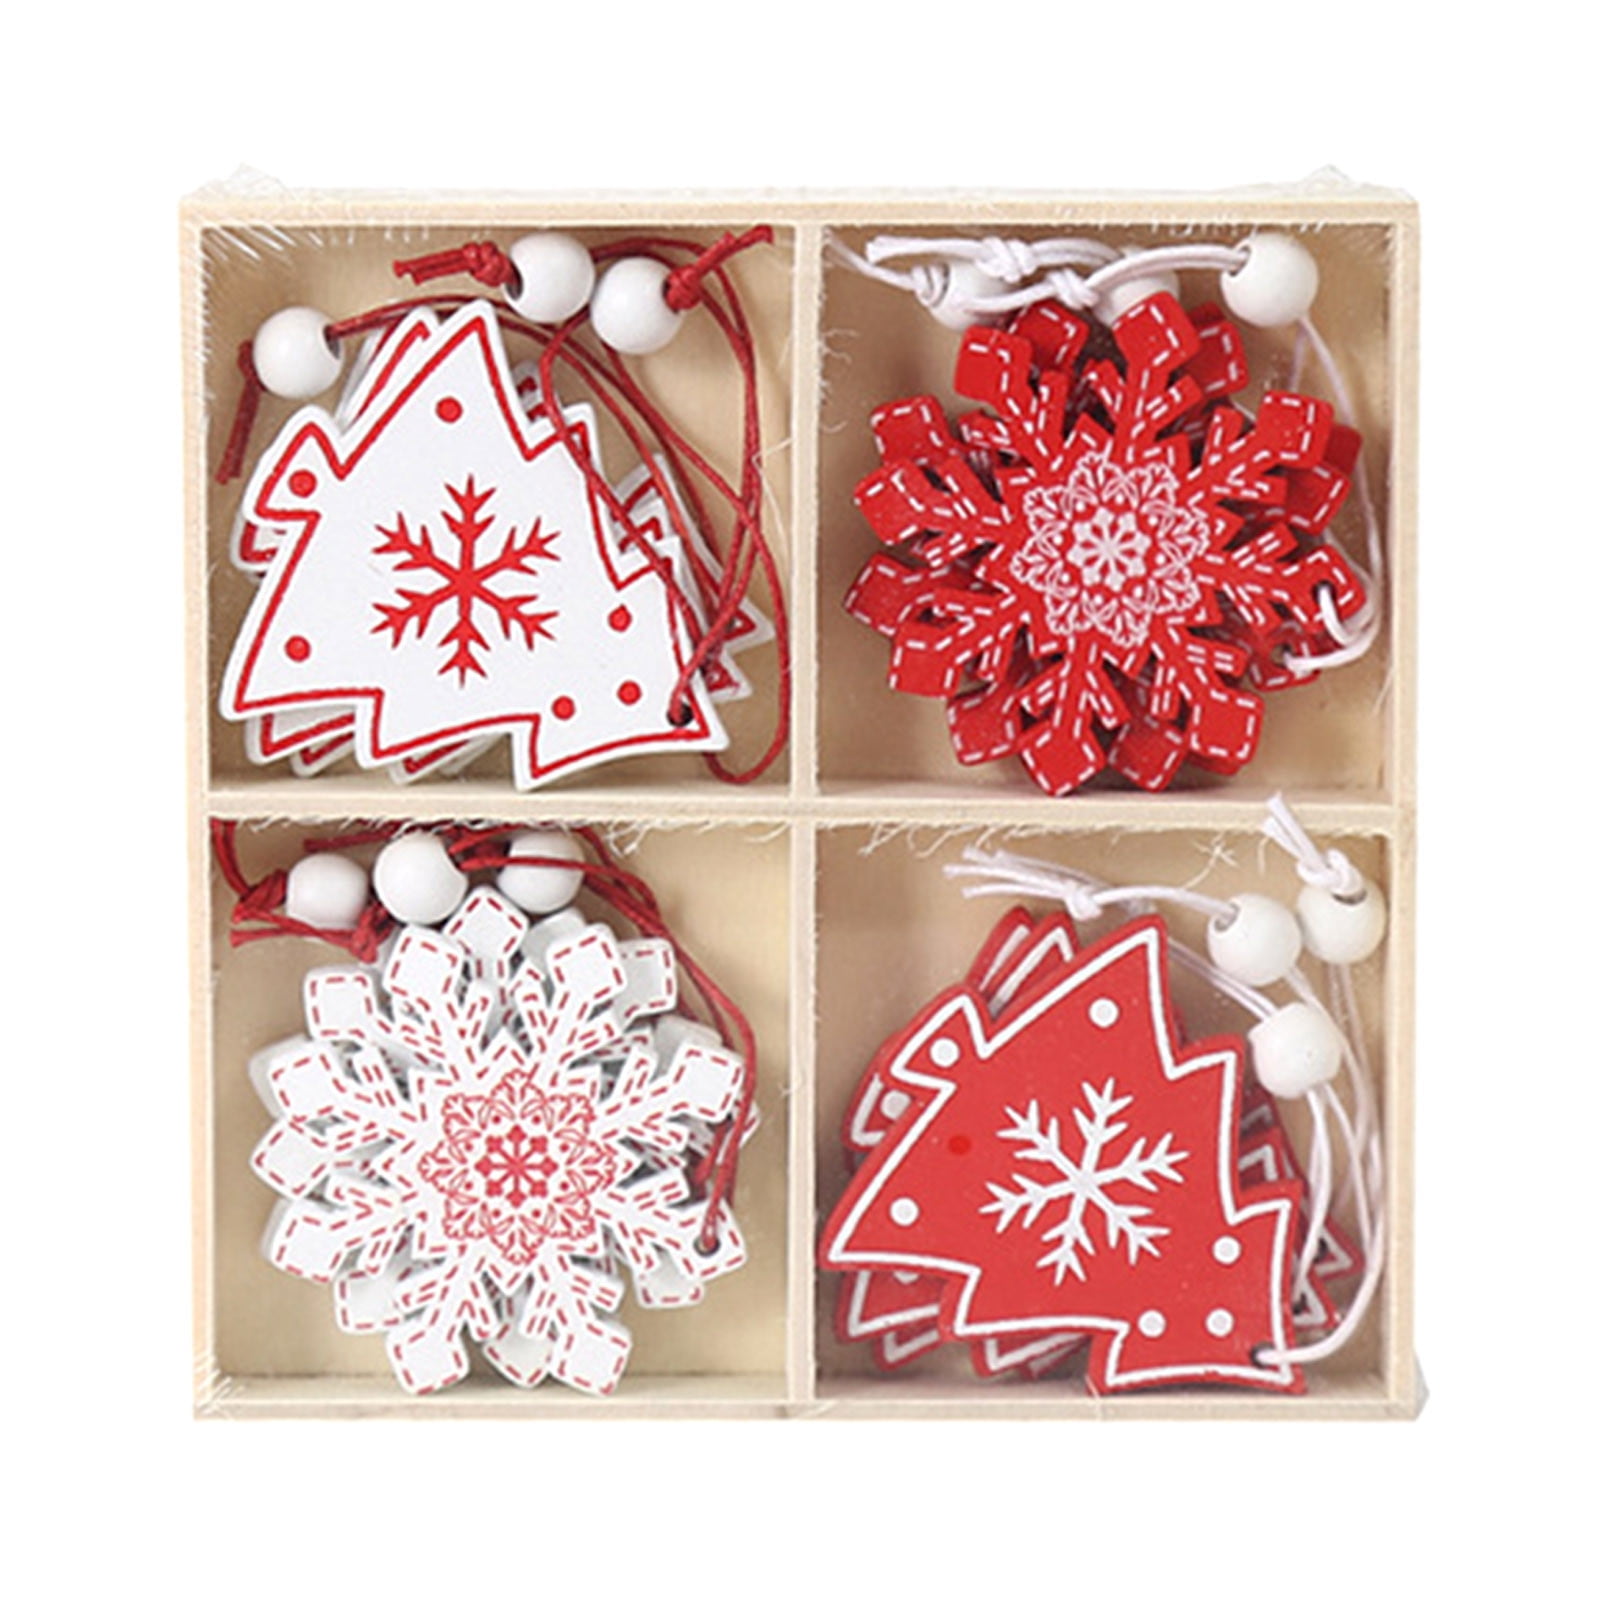 aoksee Christmas Decorations 12PC Set Of Christmas Ornaments Painted ...